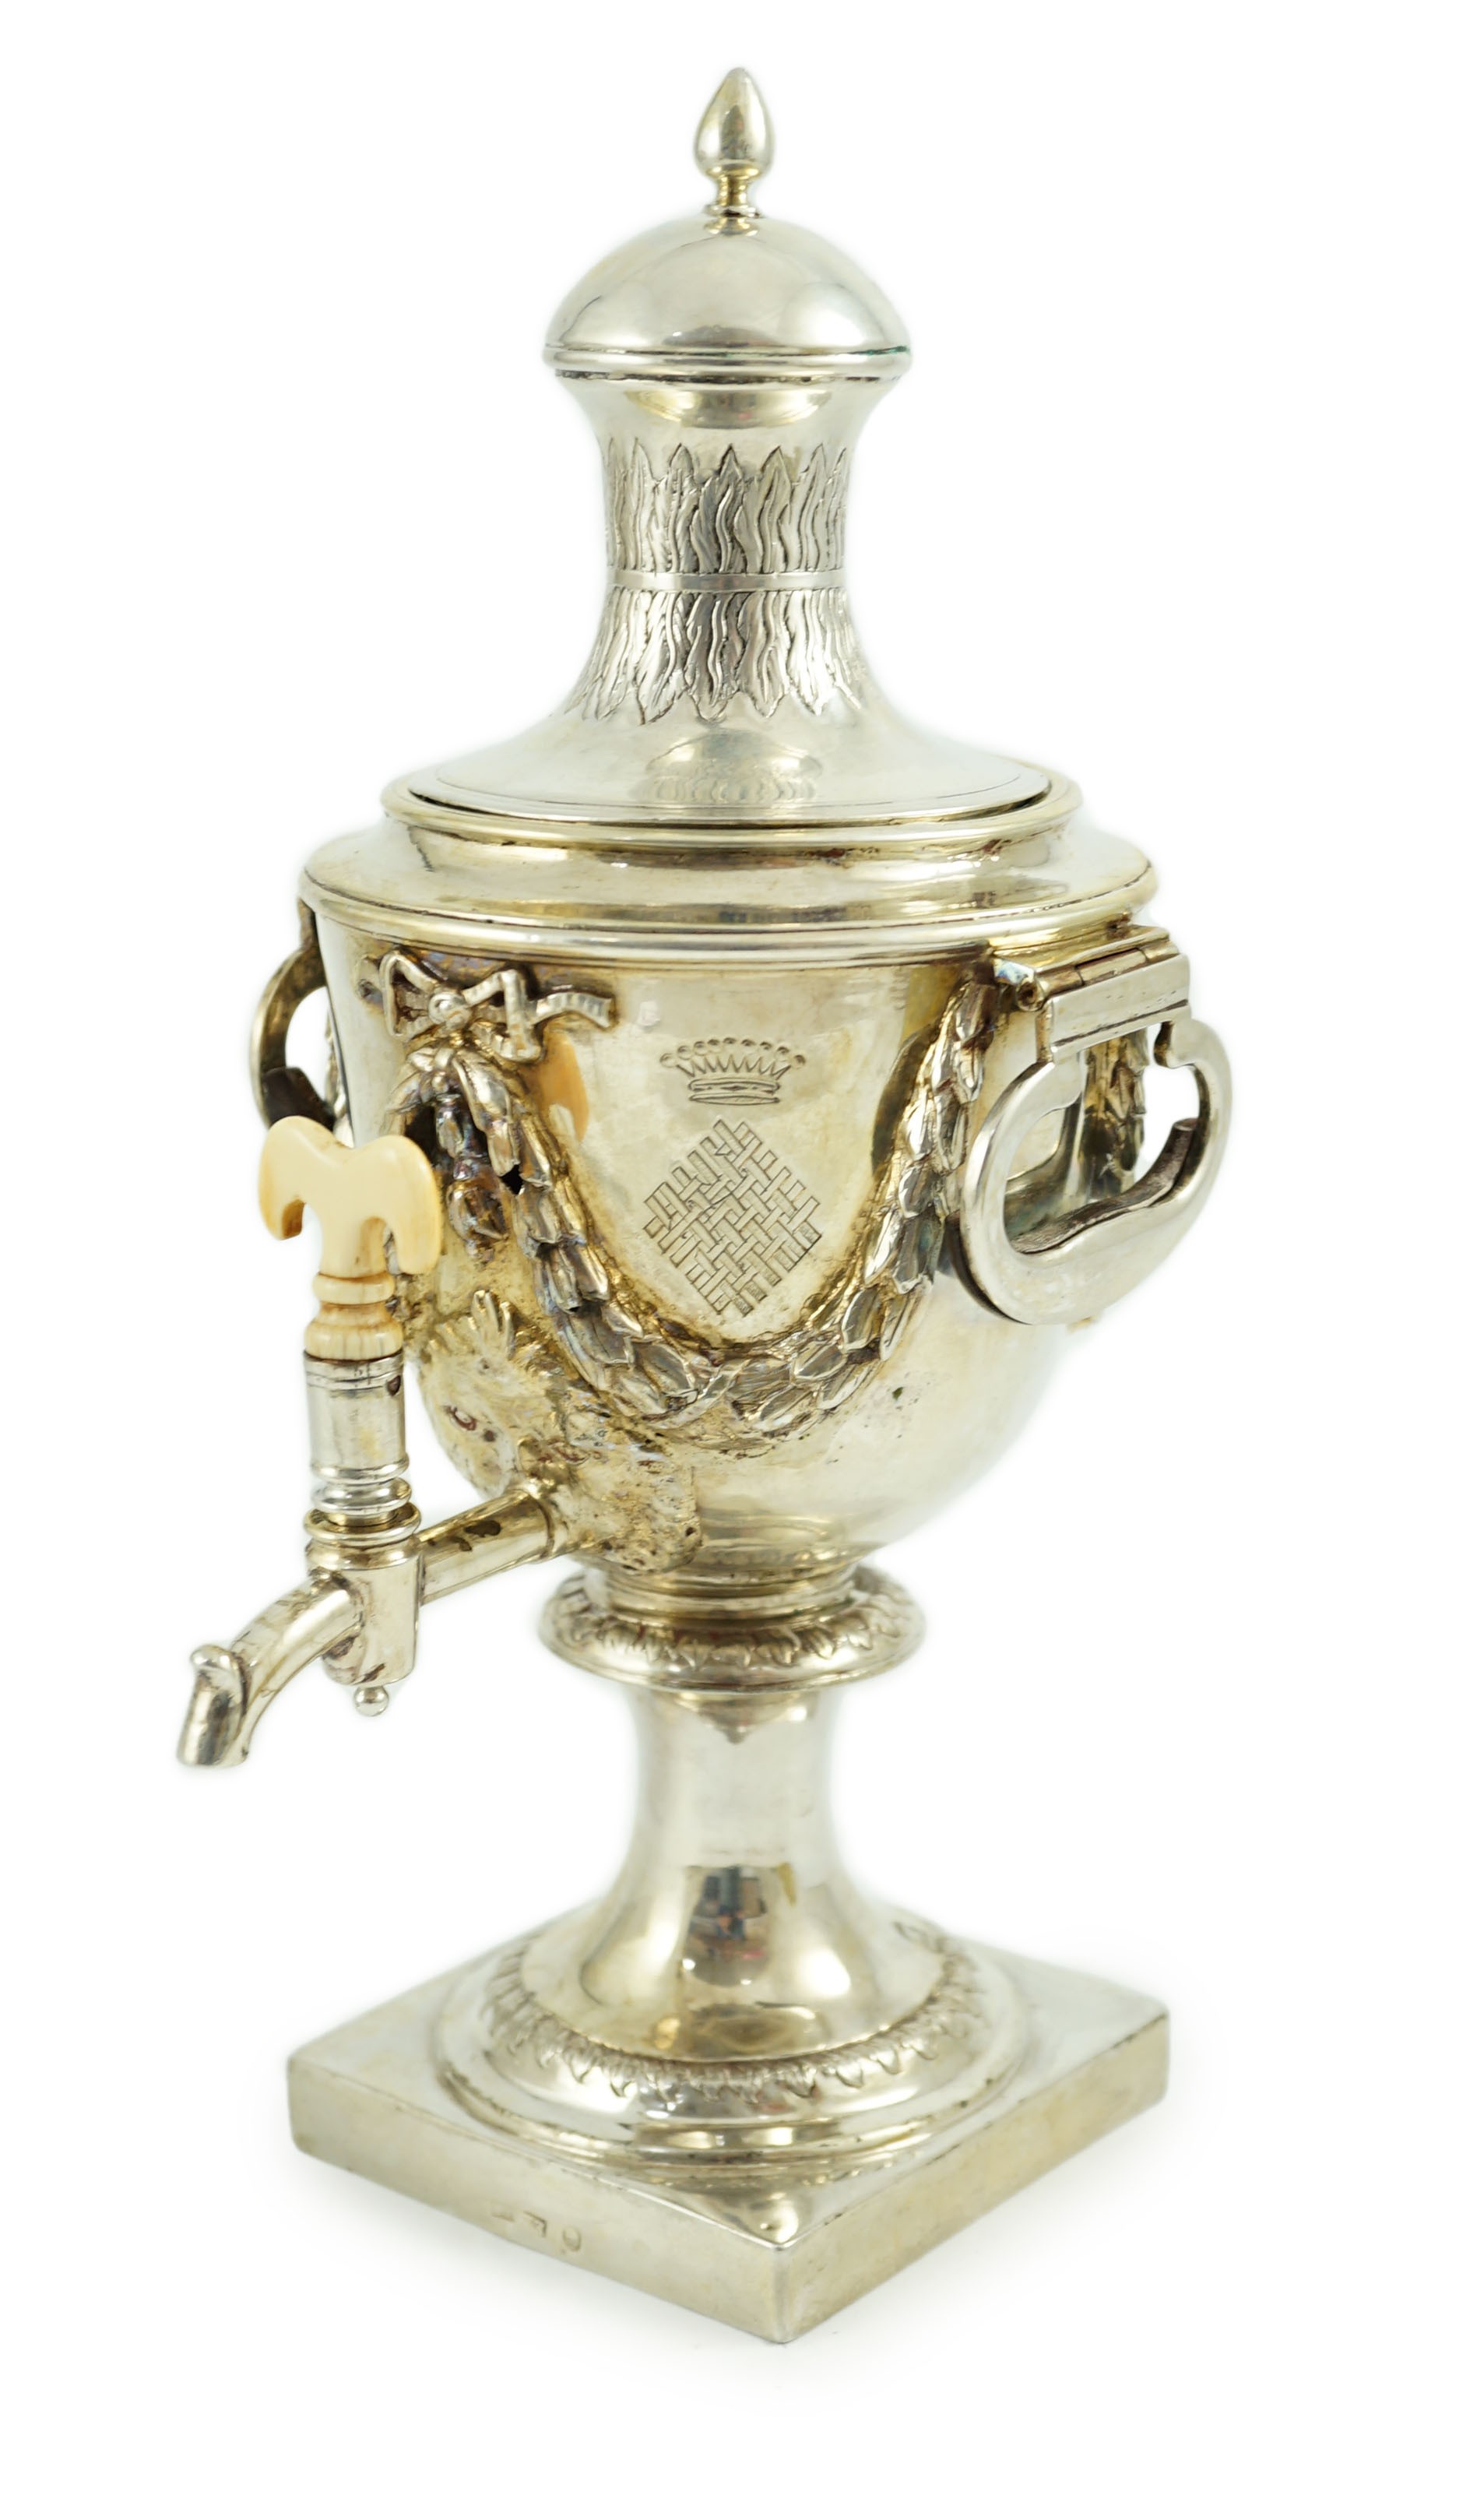 A late 18th century Russian silver samovar, with ivory spigot, master possibly Alexander Yarshinov?